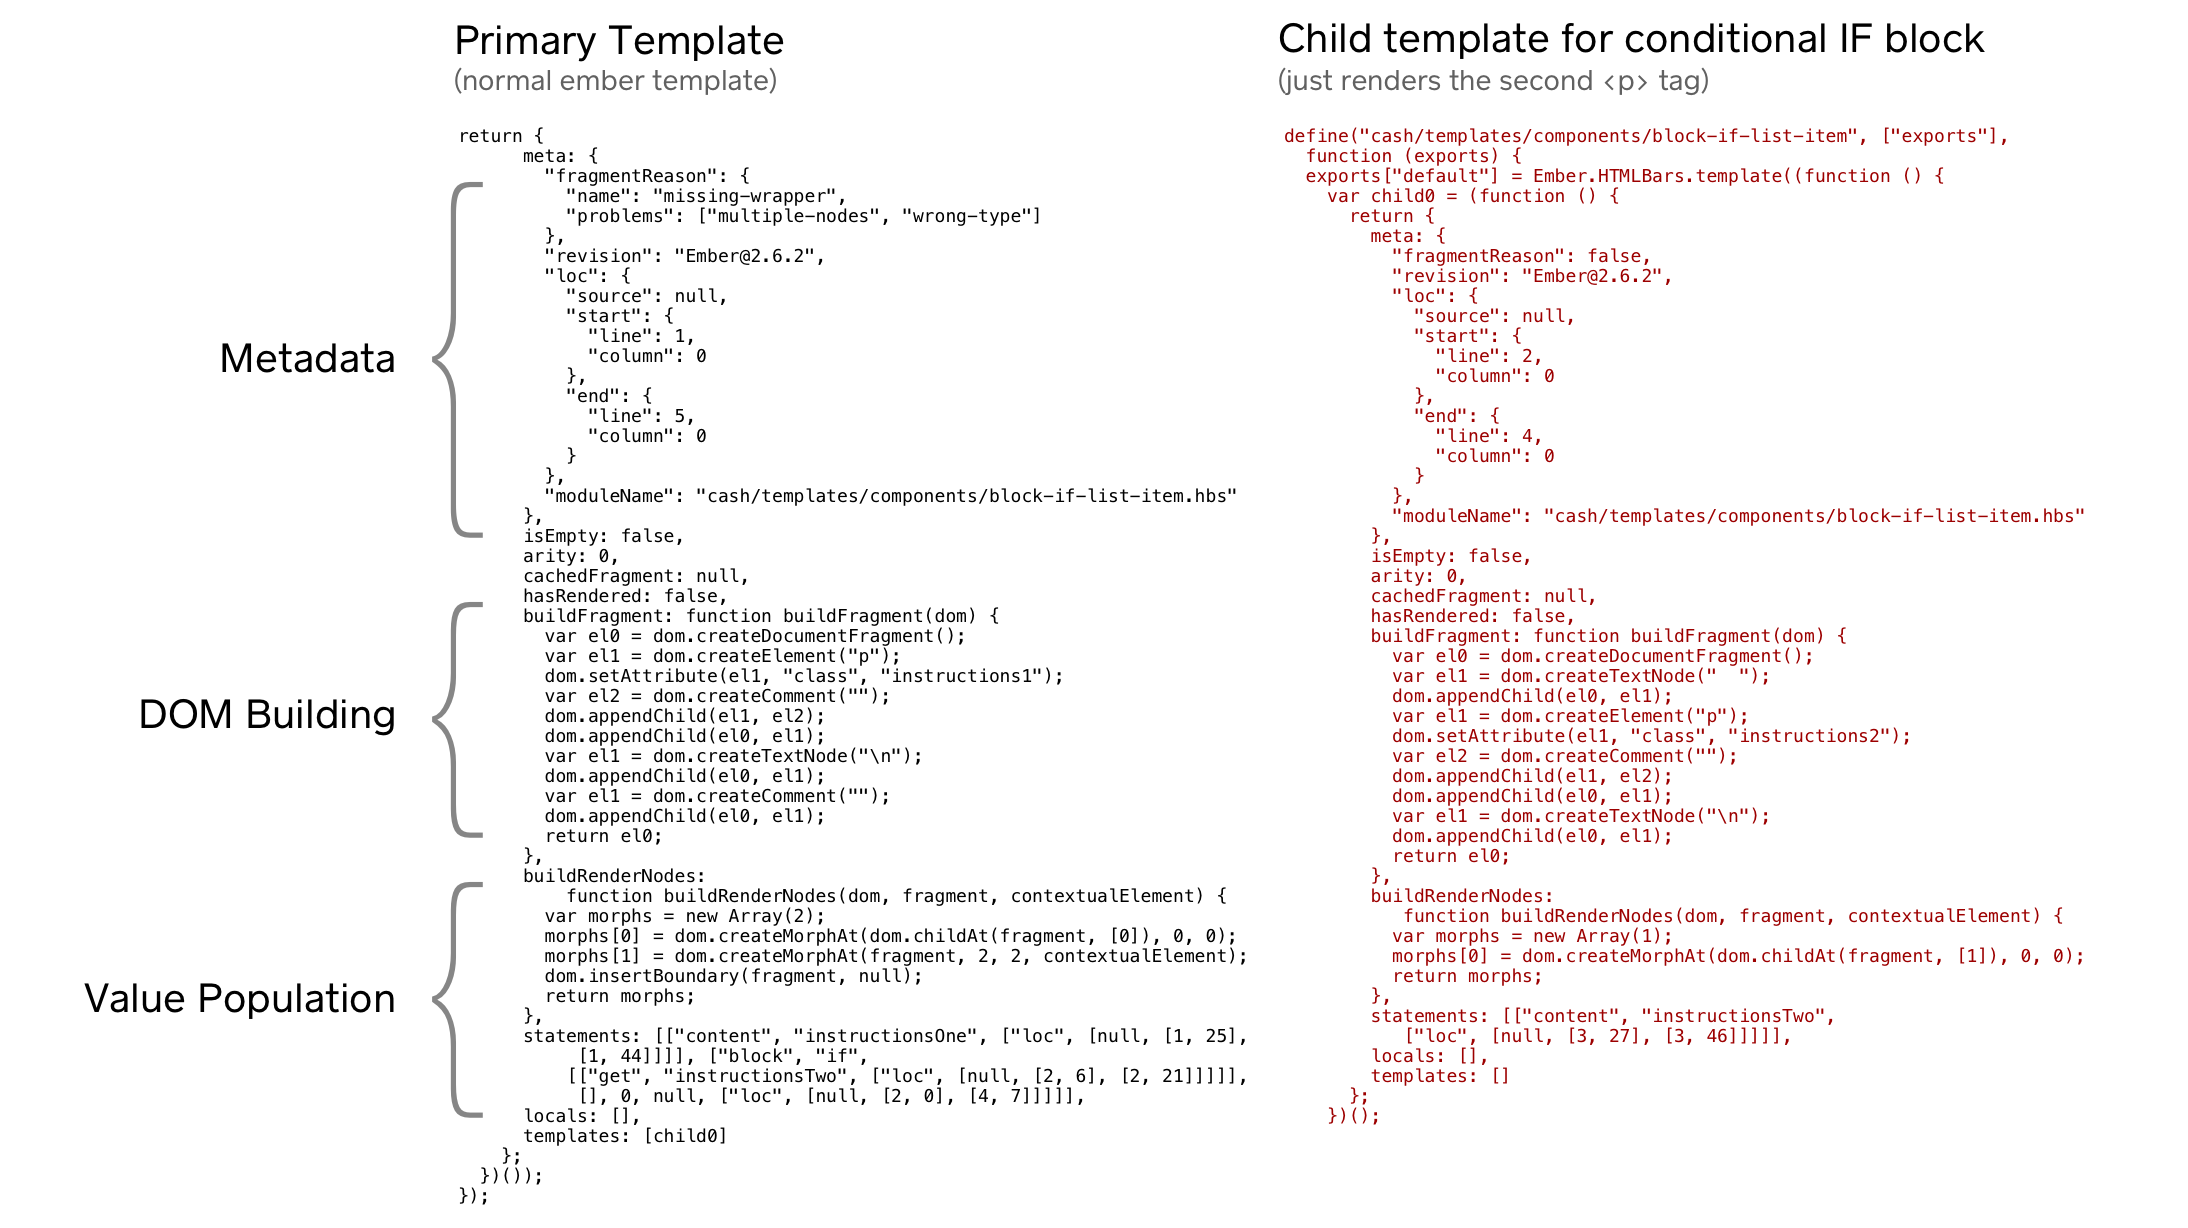 Generated JavaScript for Template with Conditional IF